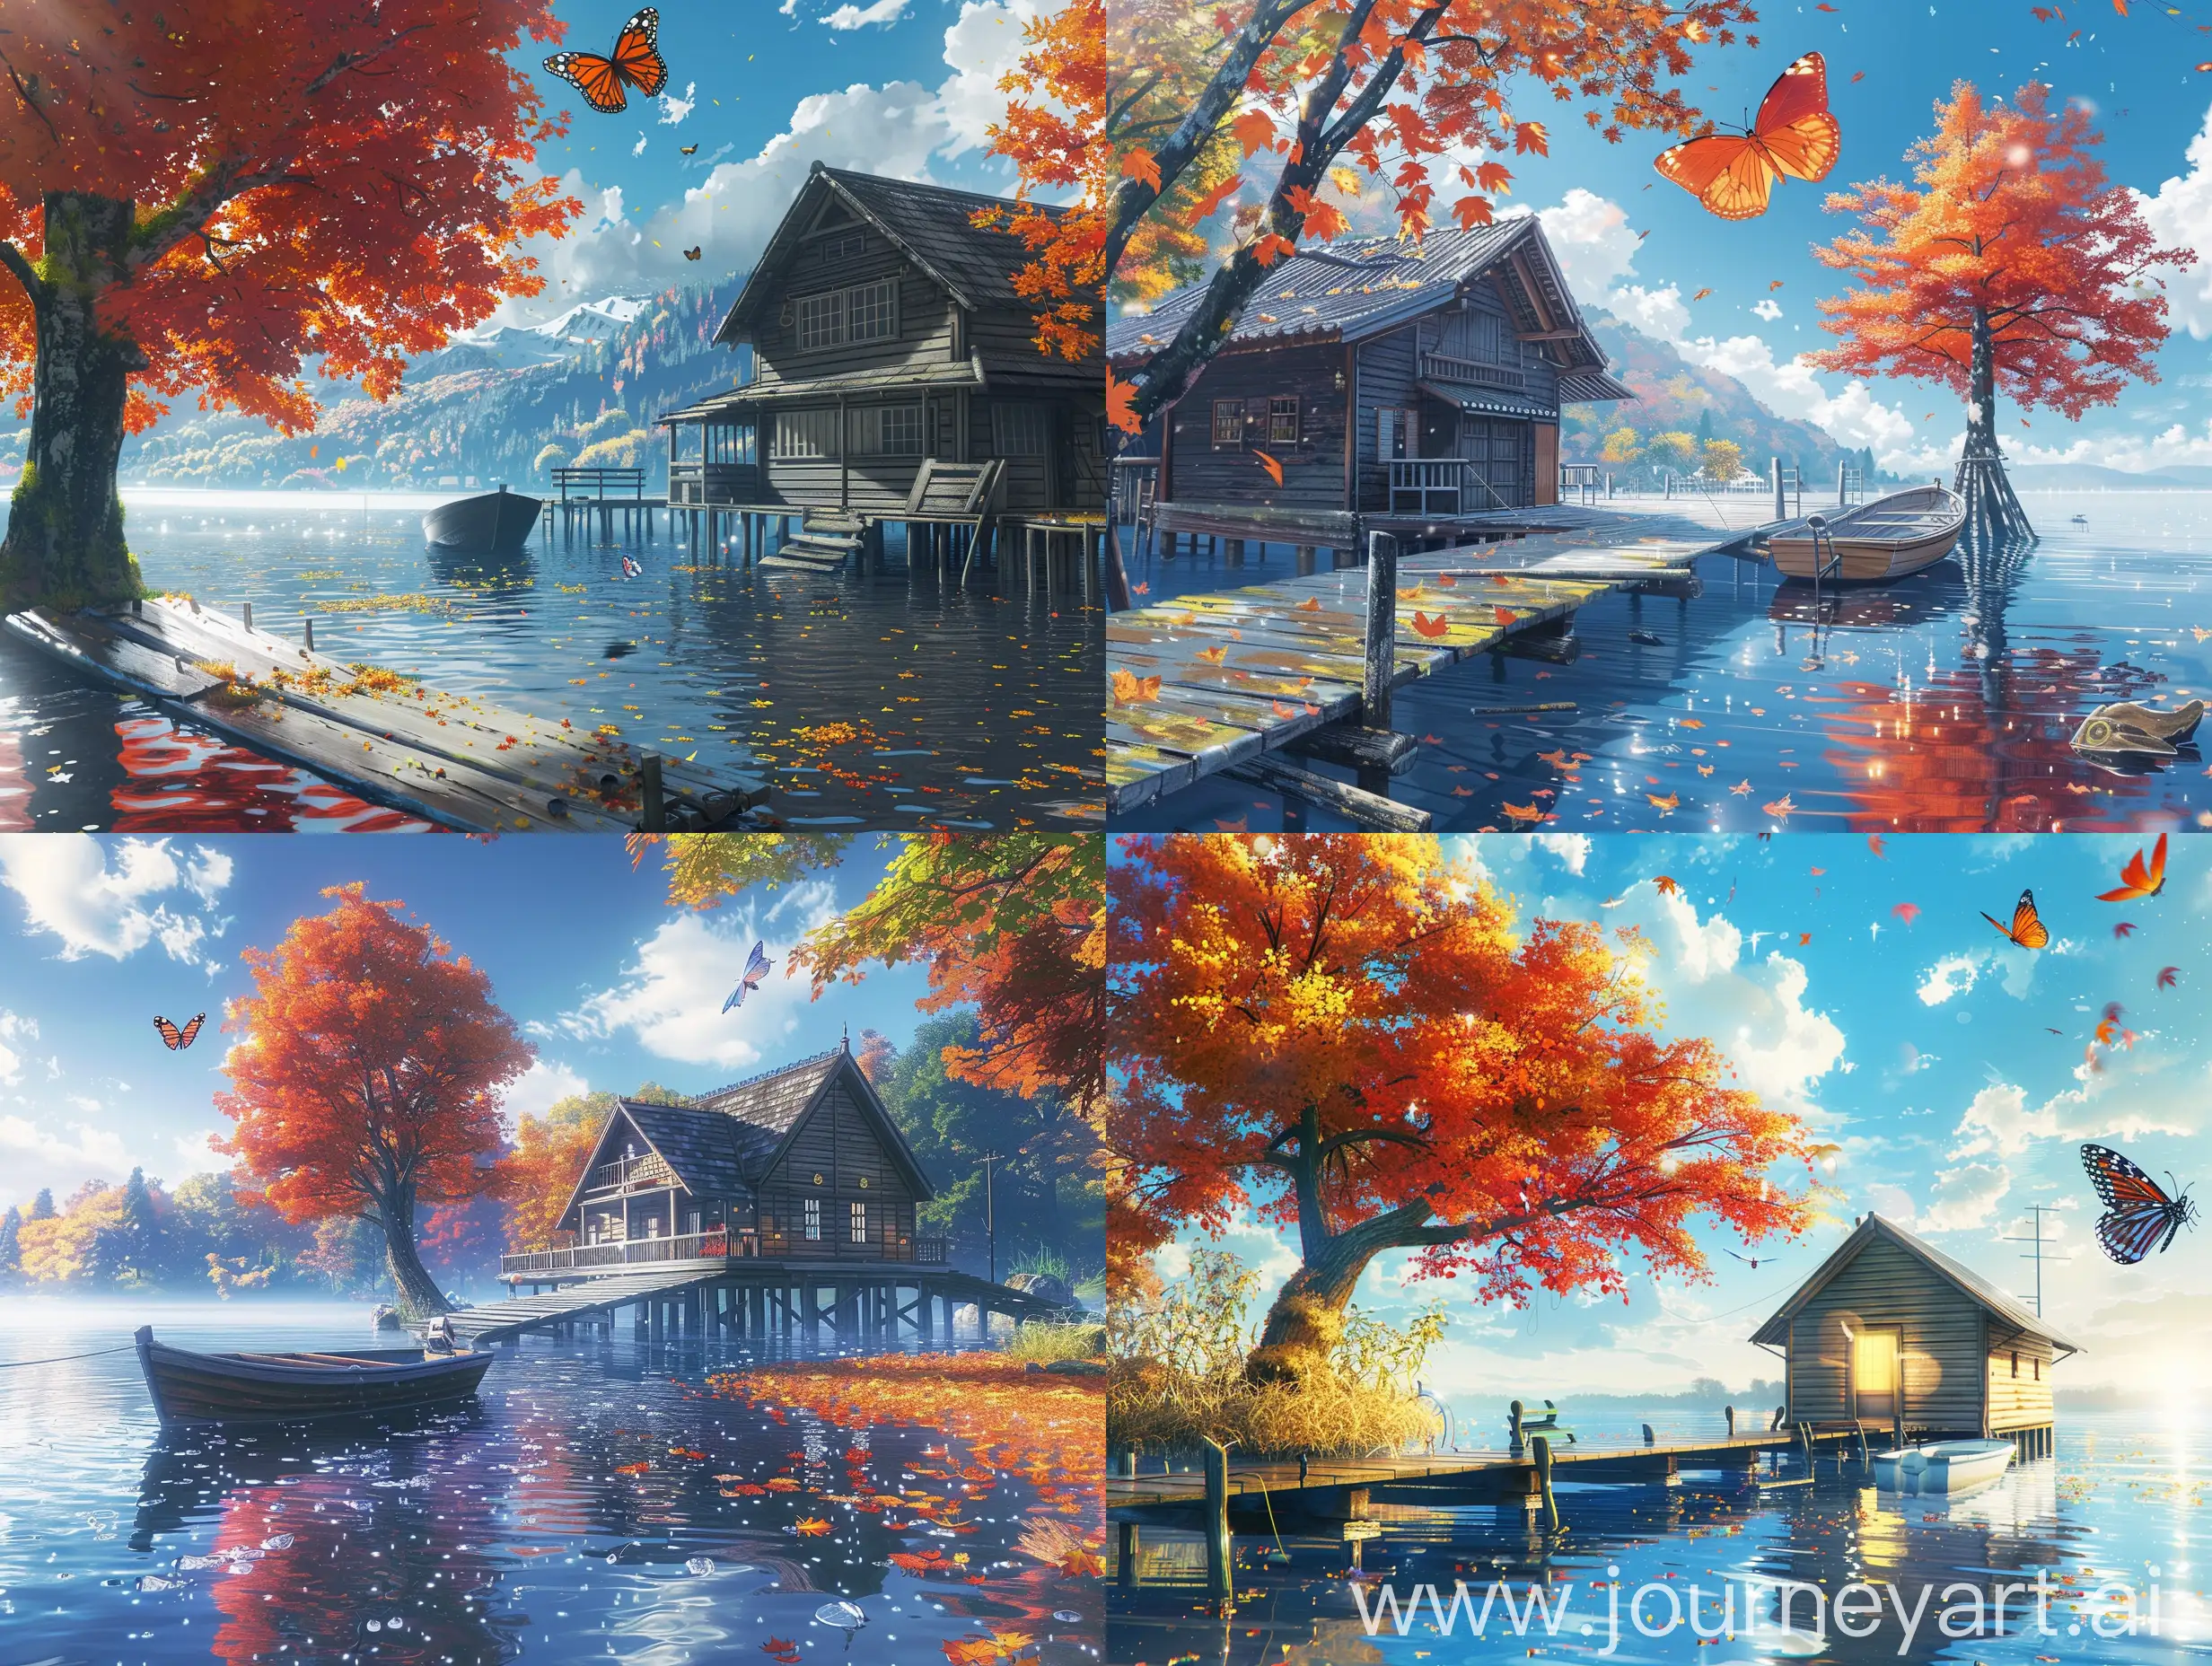 Makoto shinkai style, anime scenary, lake house, autumn fall scenary, beautiful view, cozy atmospher, orange and red tree, boat, wet pier, butterfly, beautiful view, early morning, glistening atmosphere, sunlight, blue sky